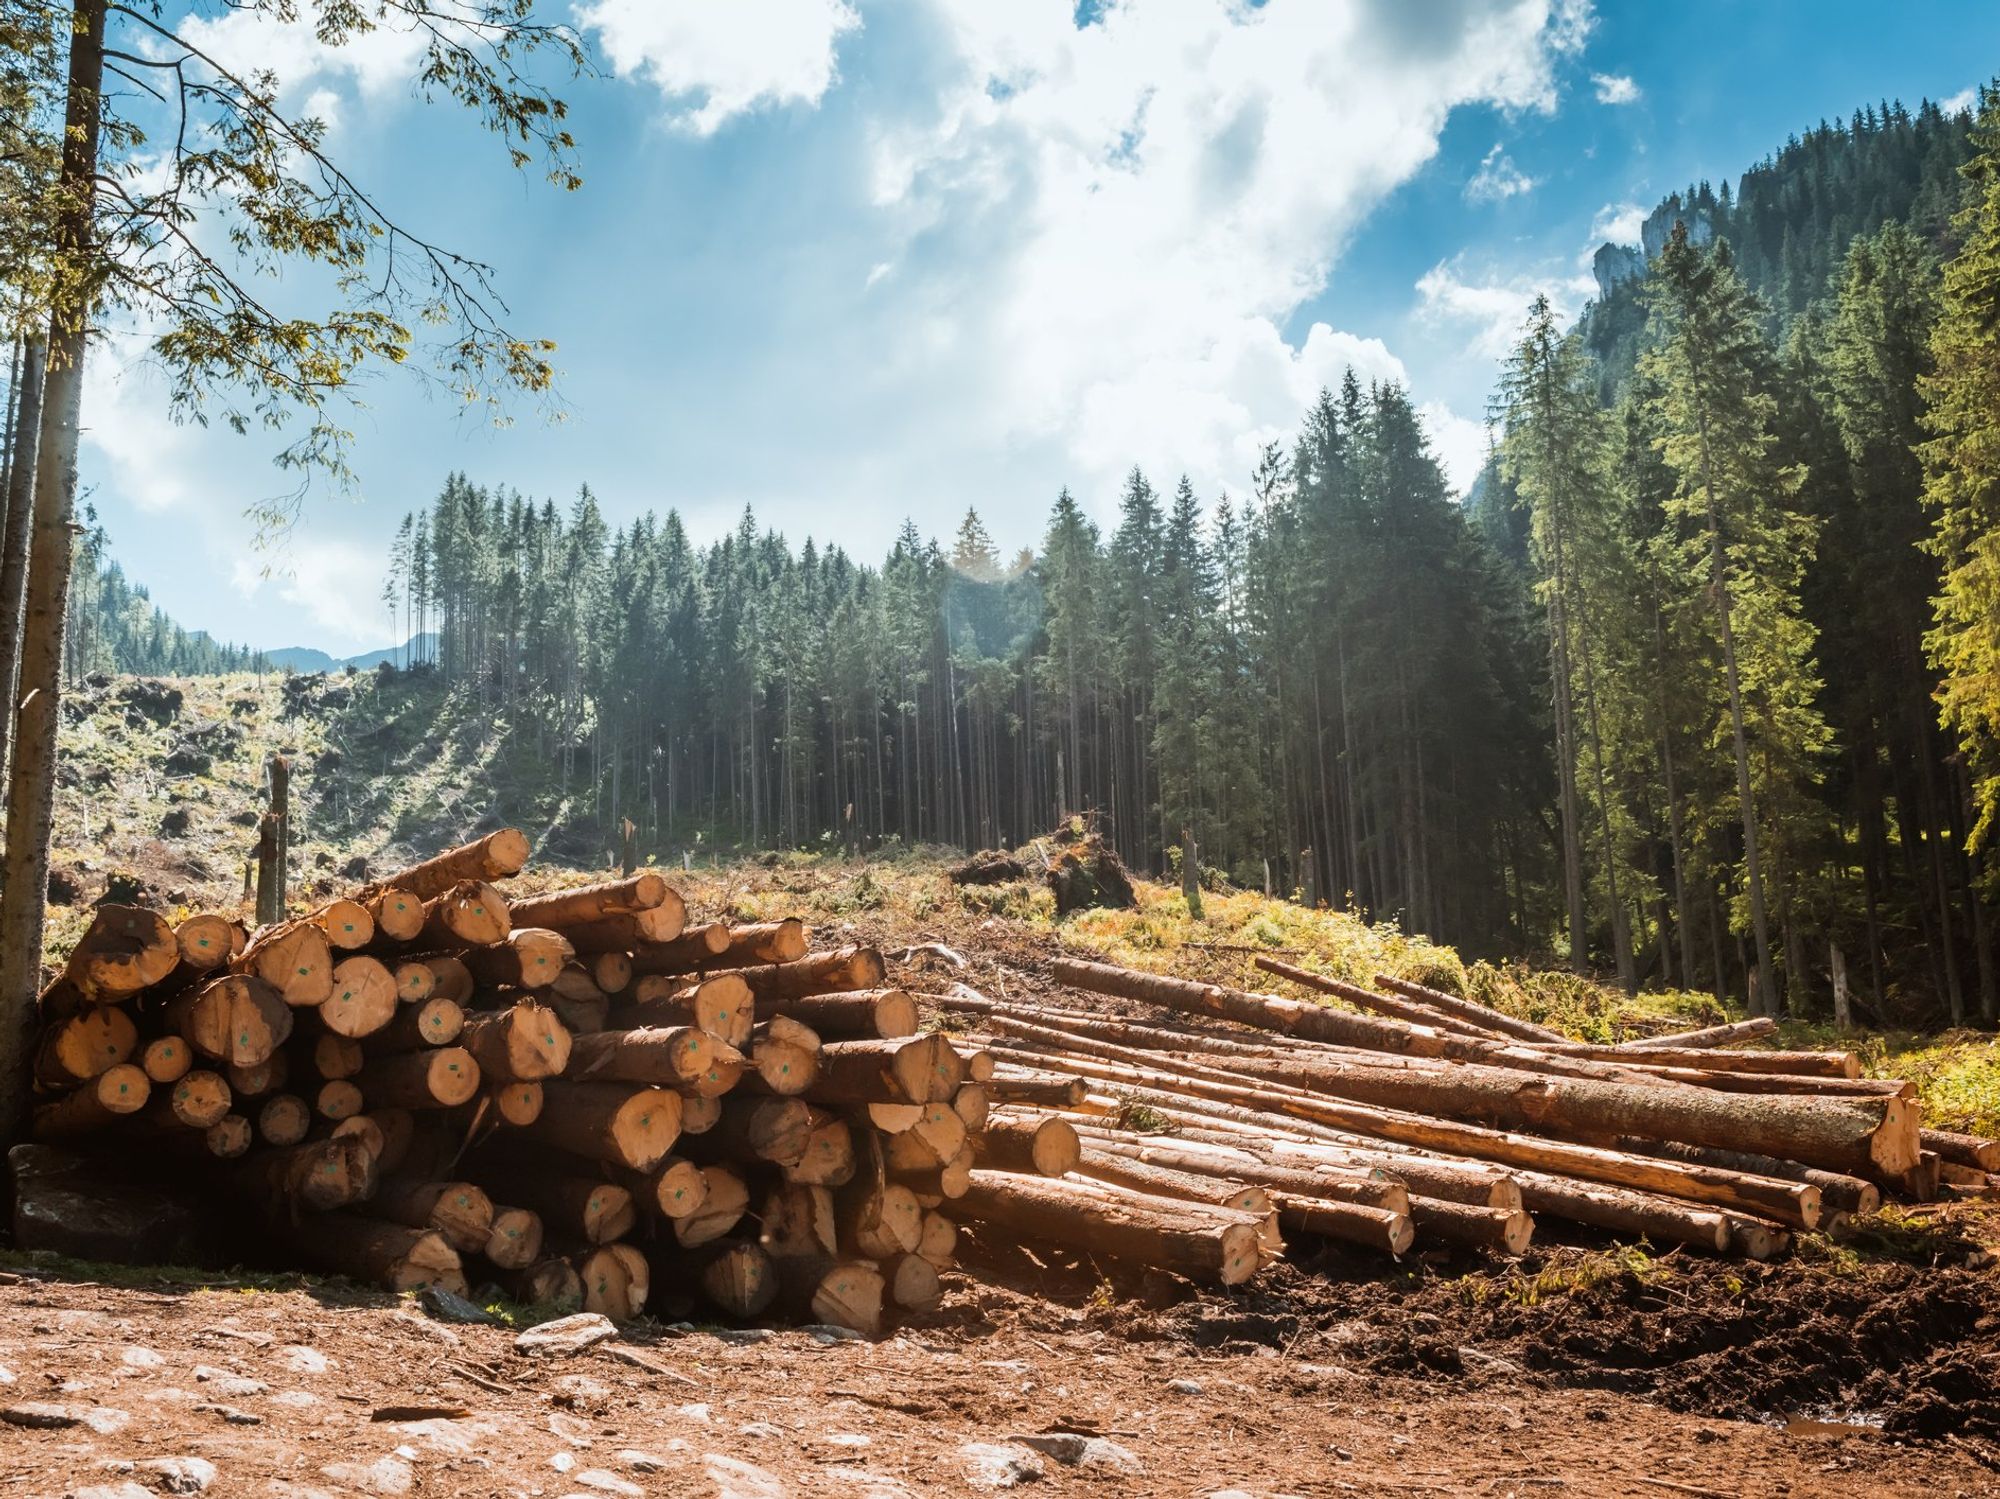 Italy and the United States bought timber from Russia for more than 1 billion euros, despite the sanctions